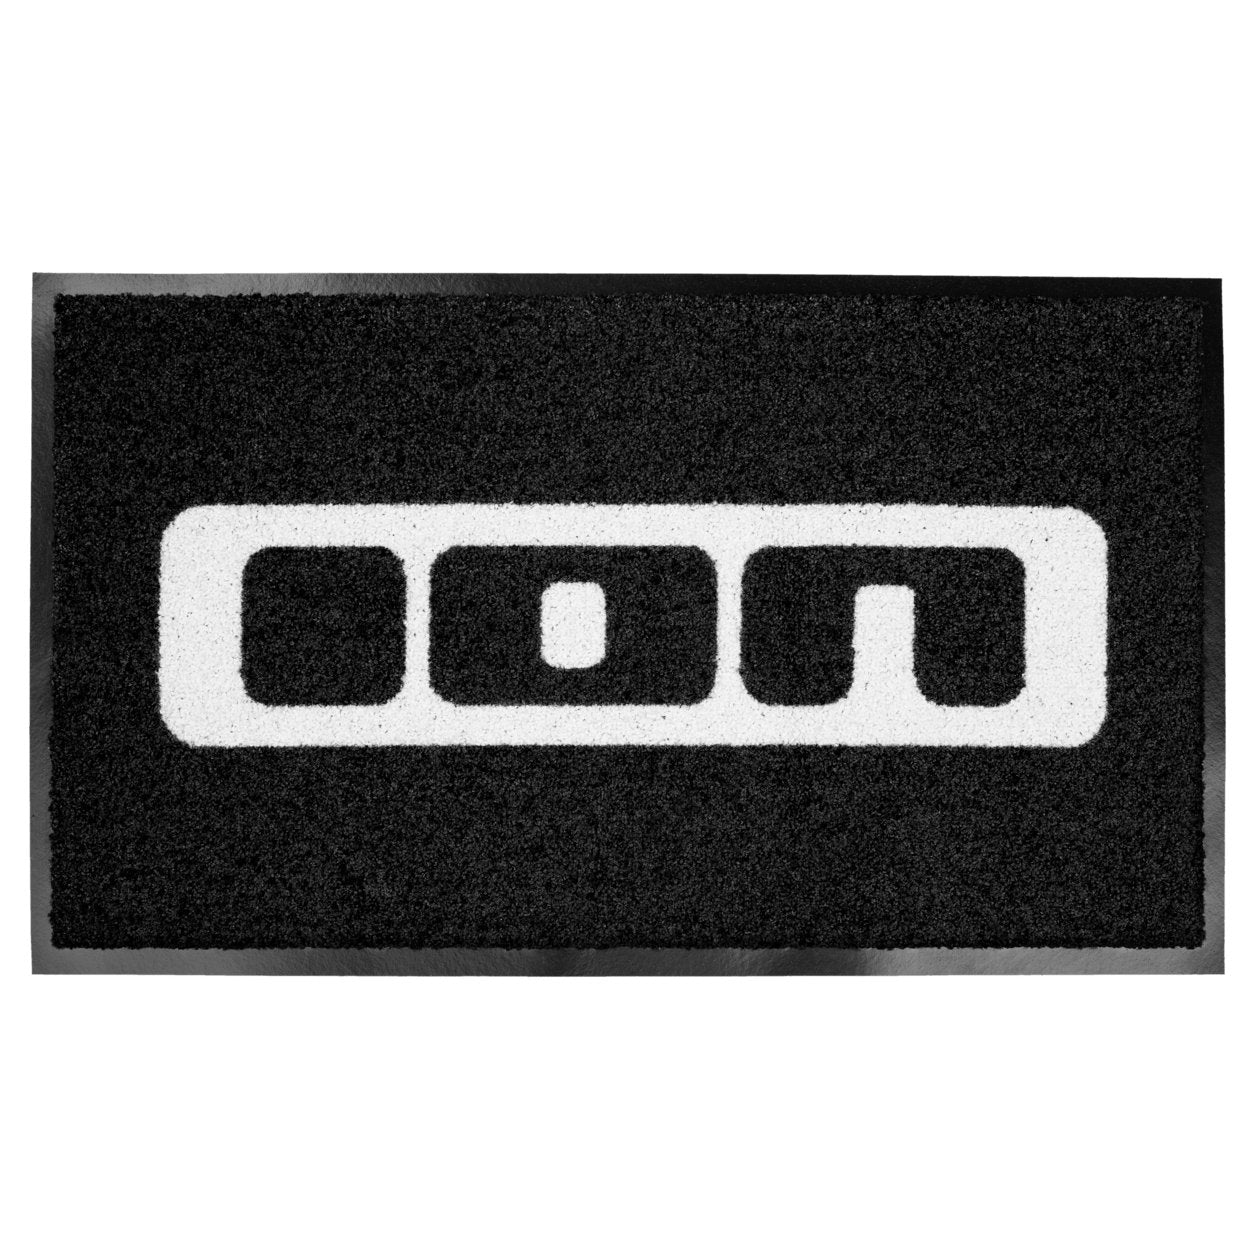 ION Doormat (50x70cm) 2022 - Worthing Watersports - 9008415916245 - Promo - ION Water